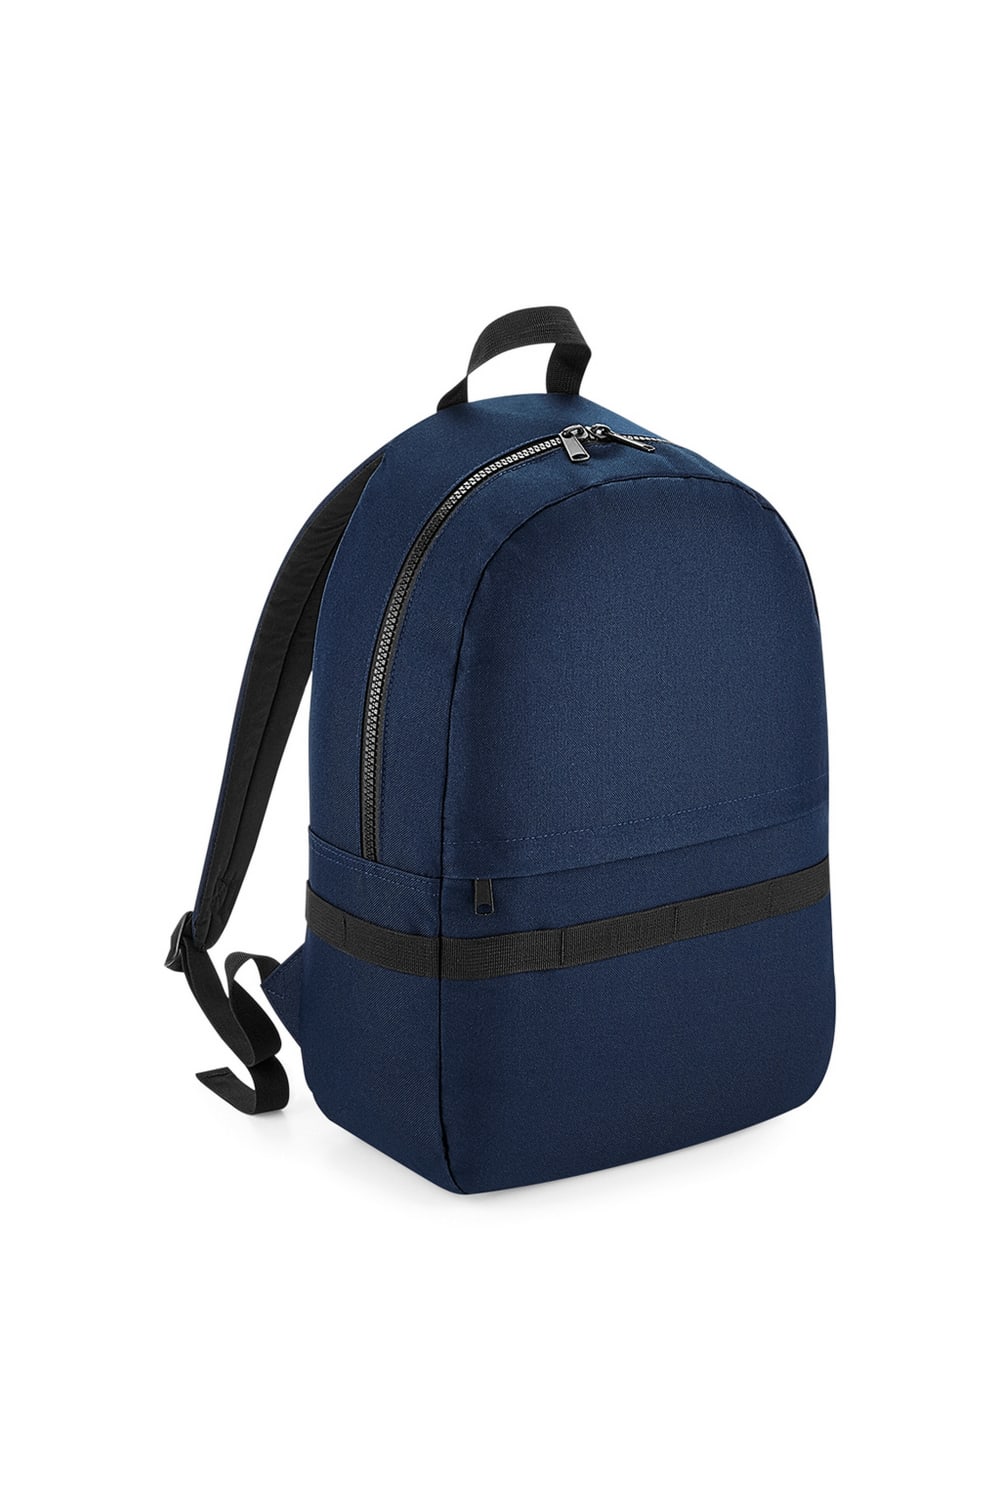 Modulr 5.2 Gallon Backpack - French Navy